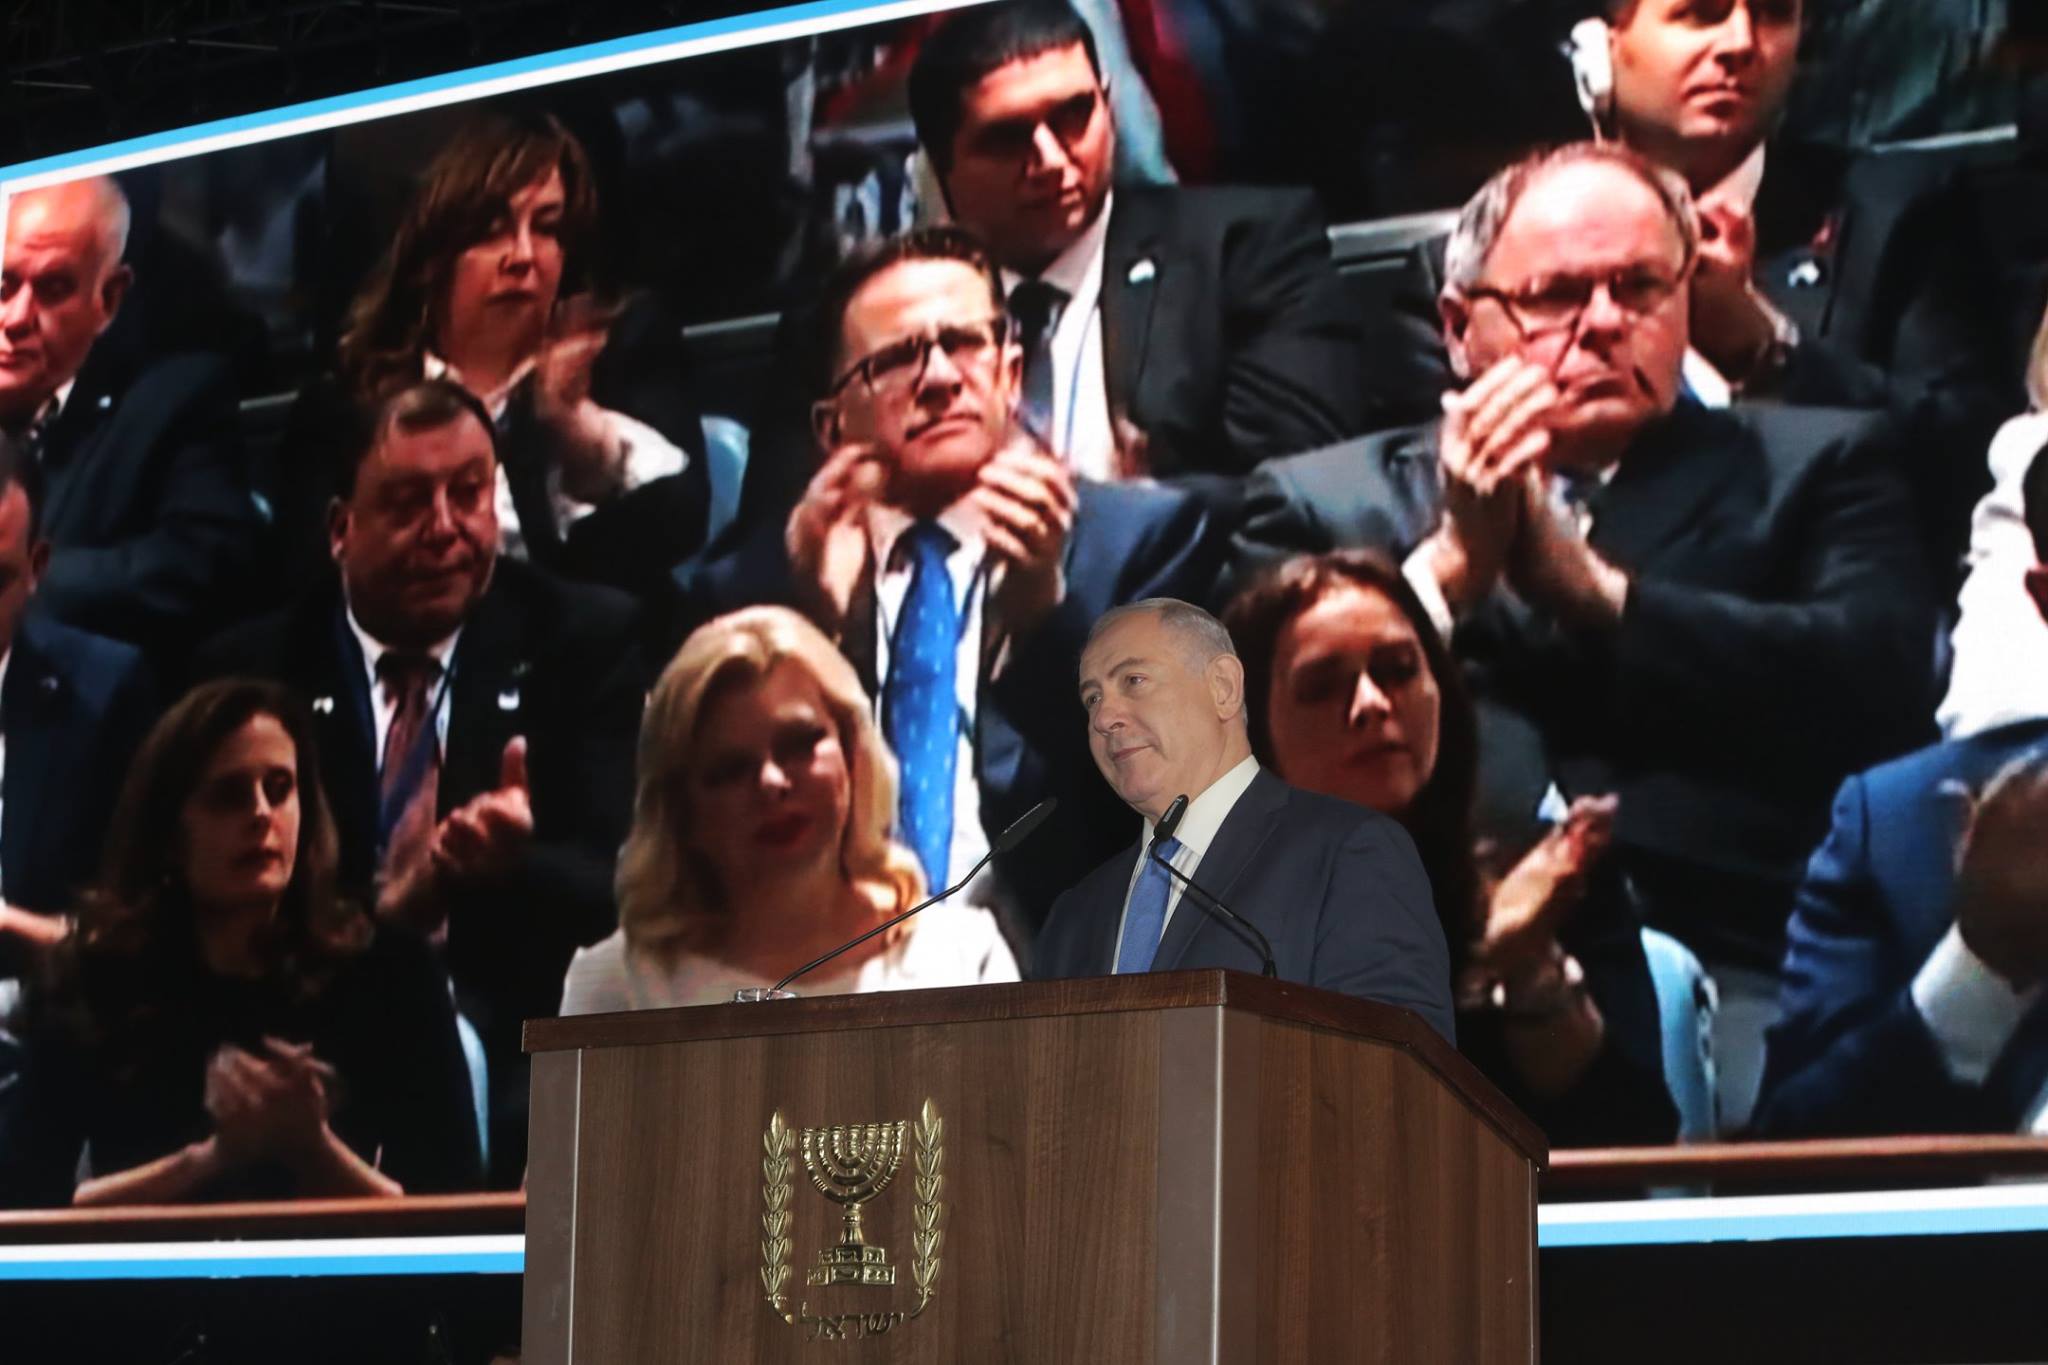 Netanyahu speech at 120 years to the first Zionist congress event